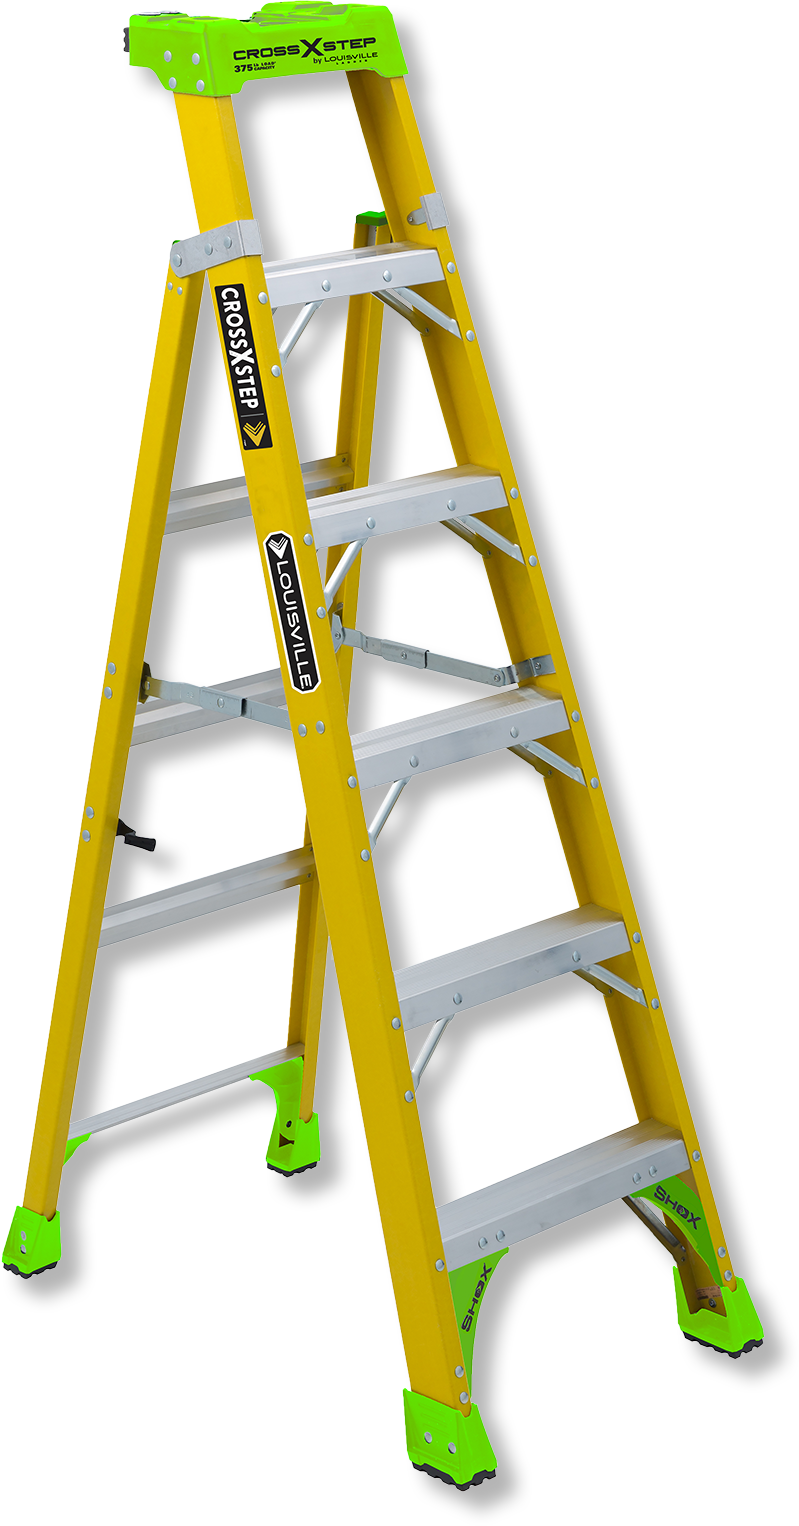 Image of the Cross X Step ladder - the ultimate tool for secure leaning ladder